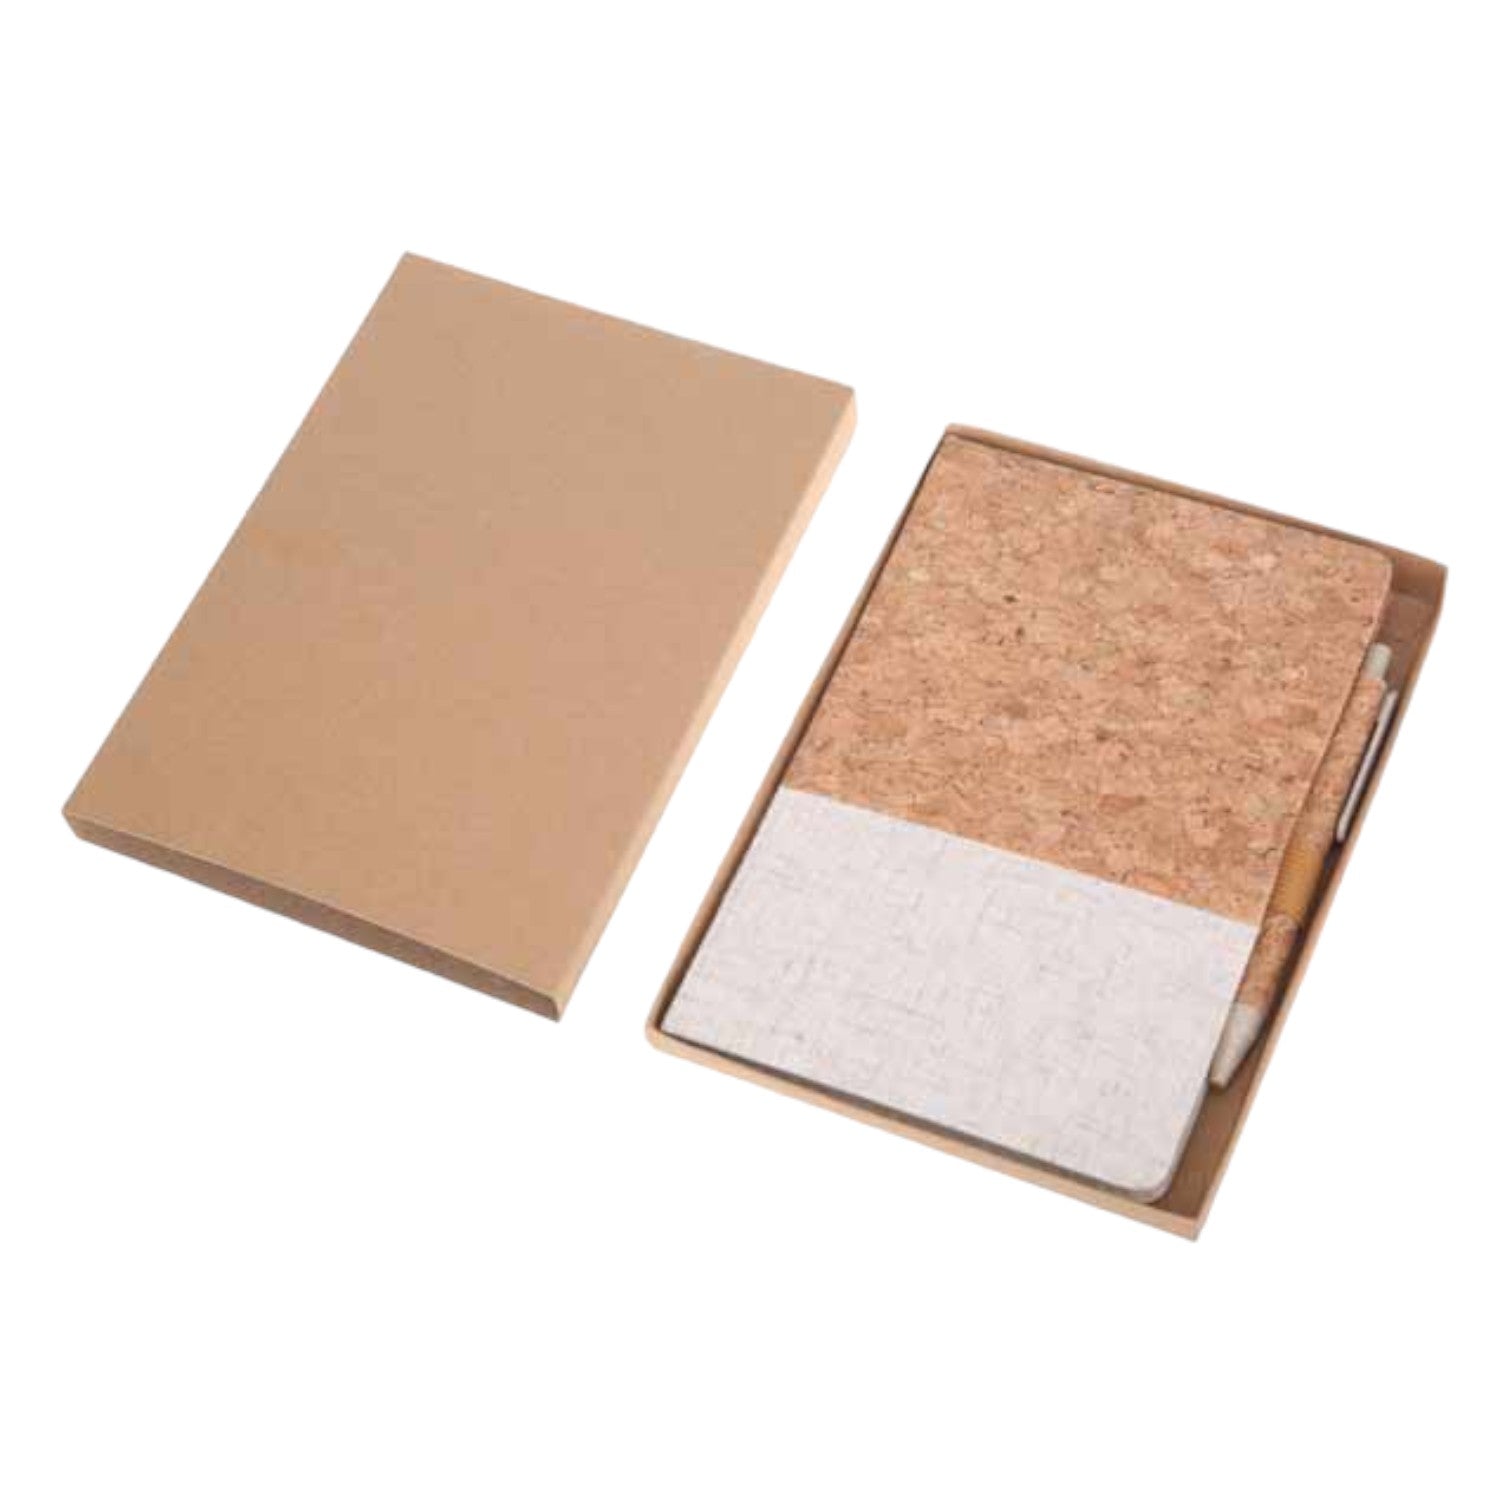 Set of A5 Cork Fabric Hard Cover Notebook and Pen - White